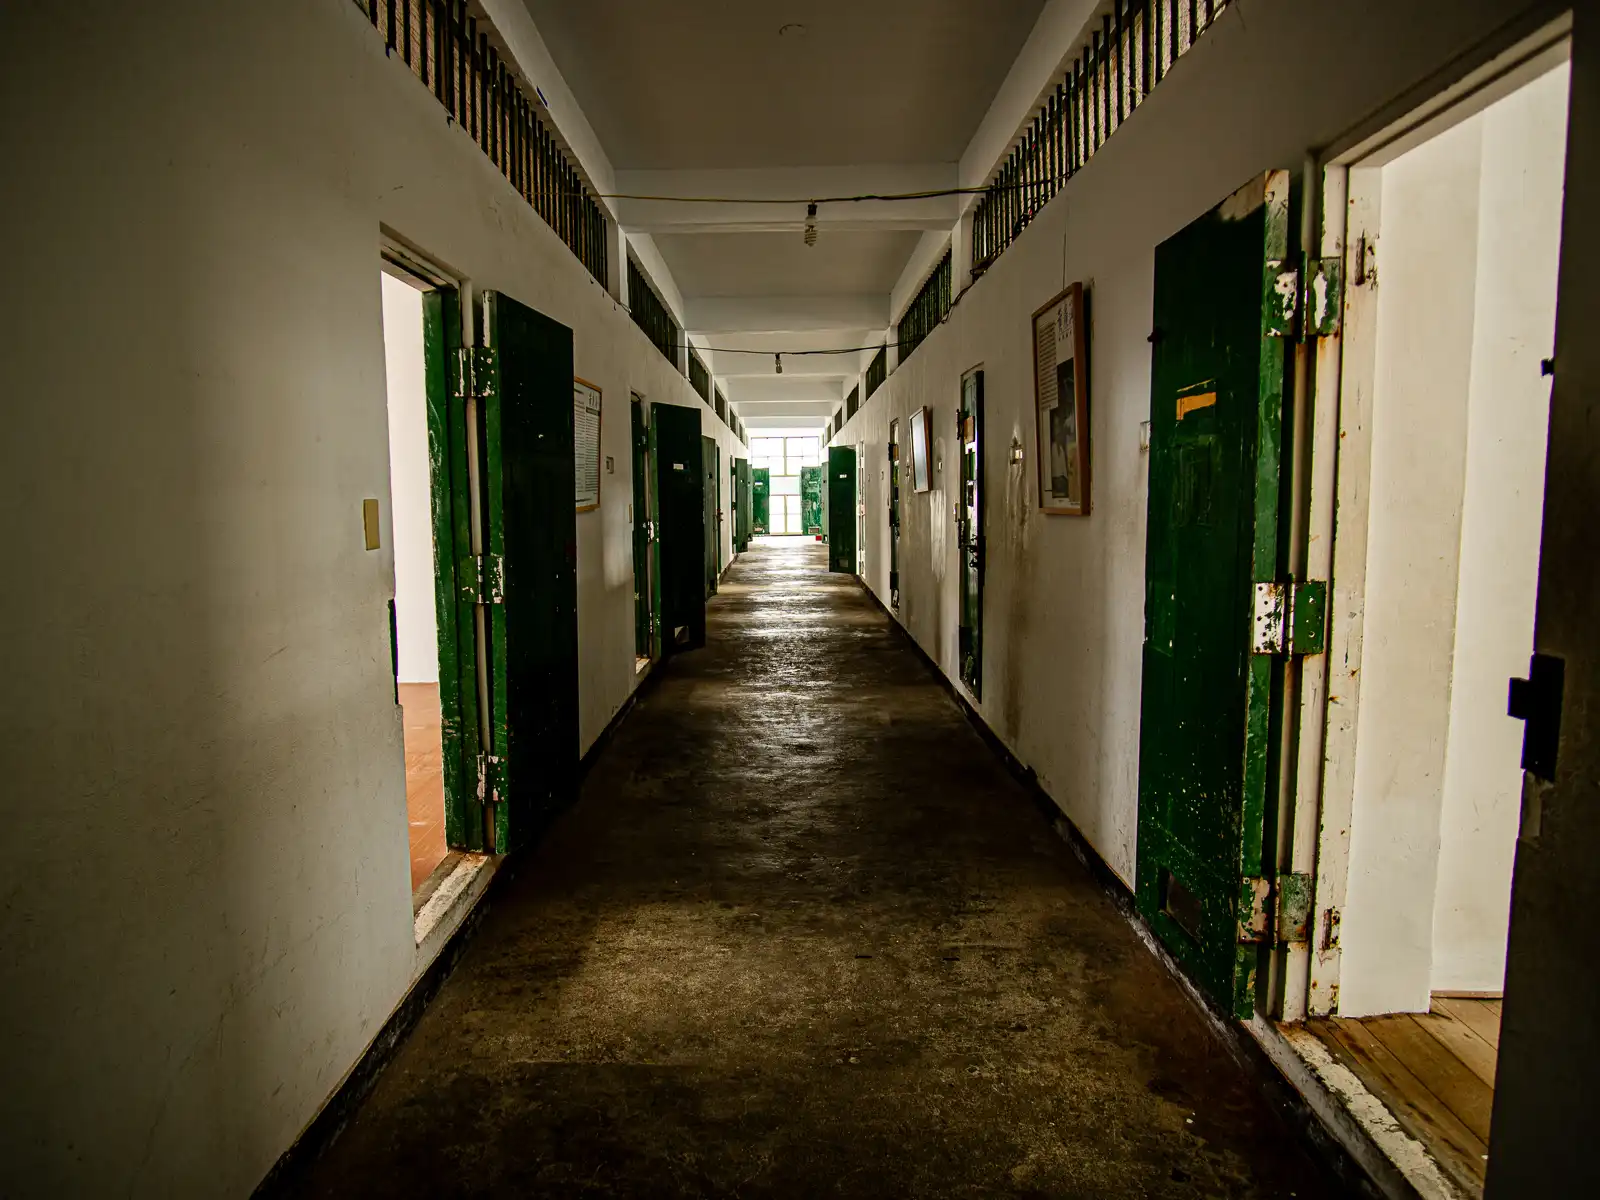 A hallway is lined with cells with thick windowless steel doors in either side.